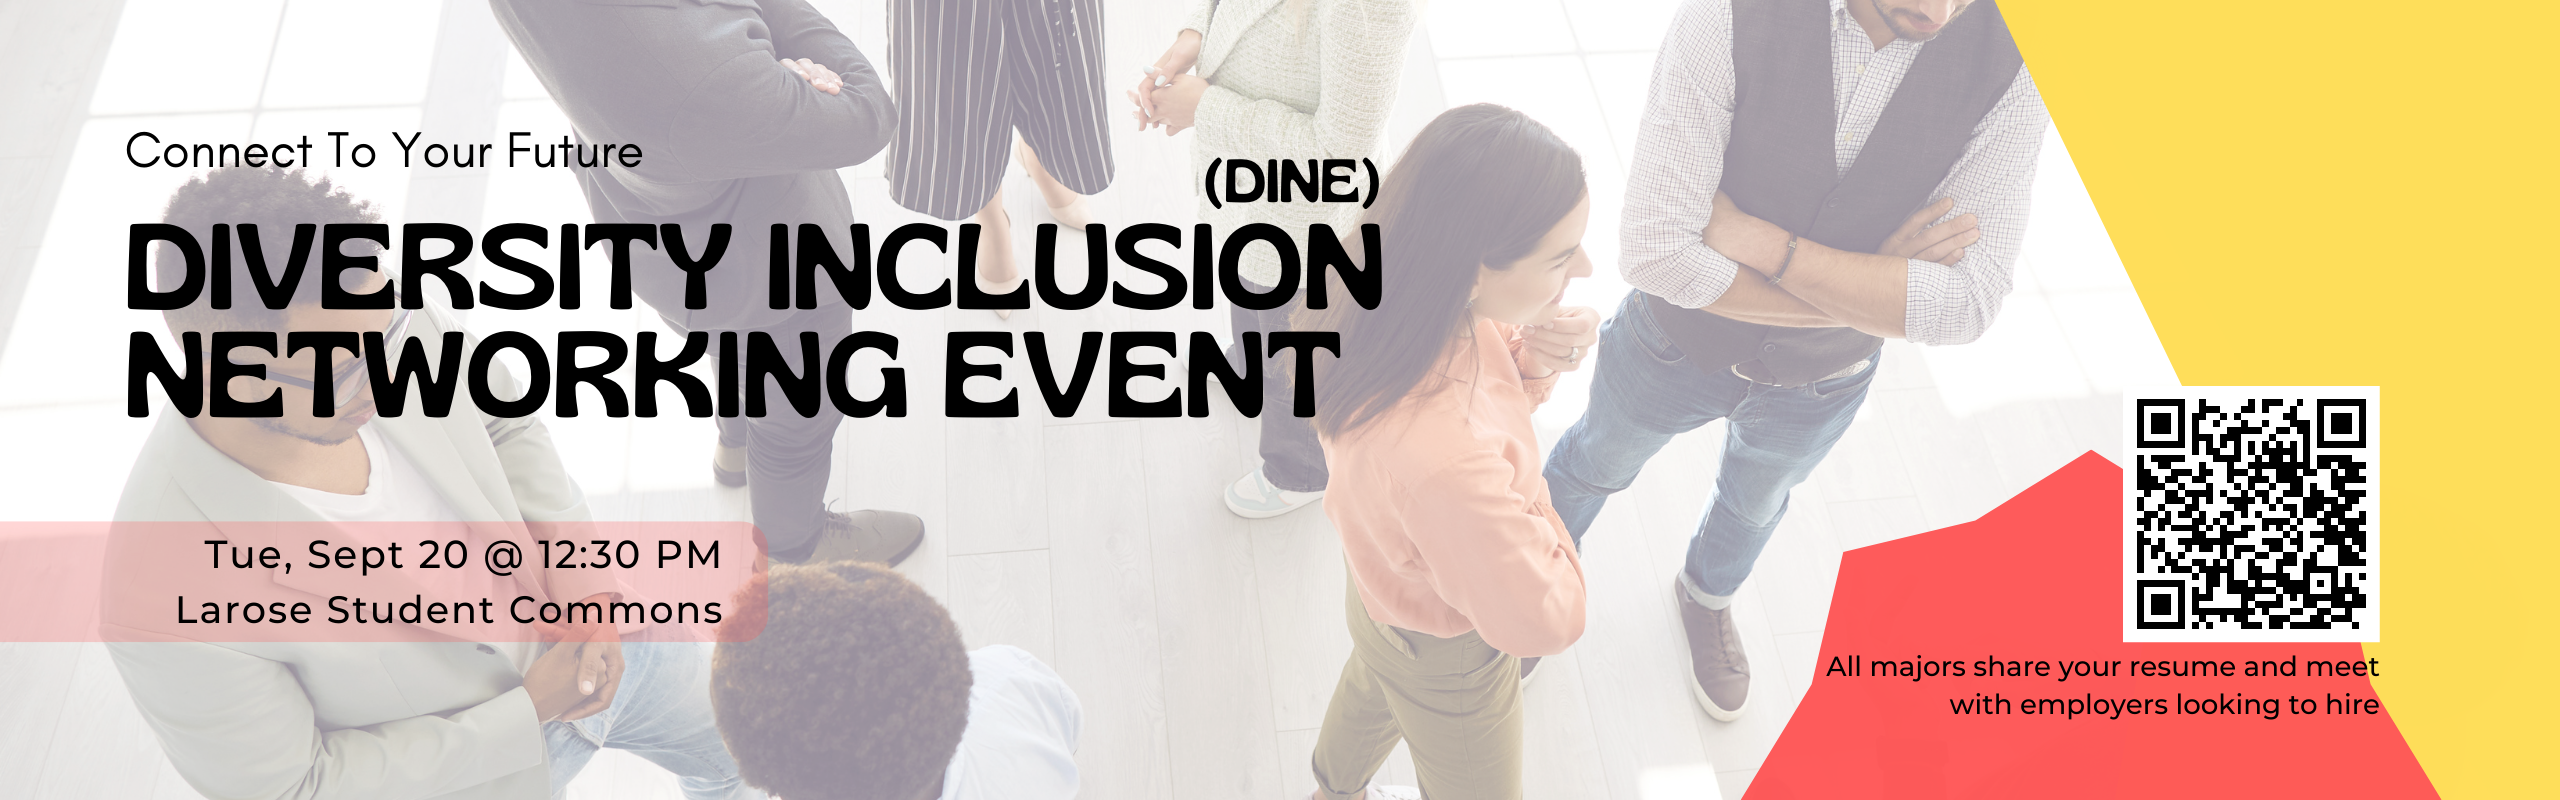 Diversity Inclusion Networking Event on Sept 20. Review EJN for details!